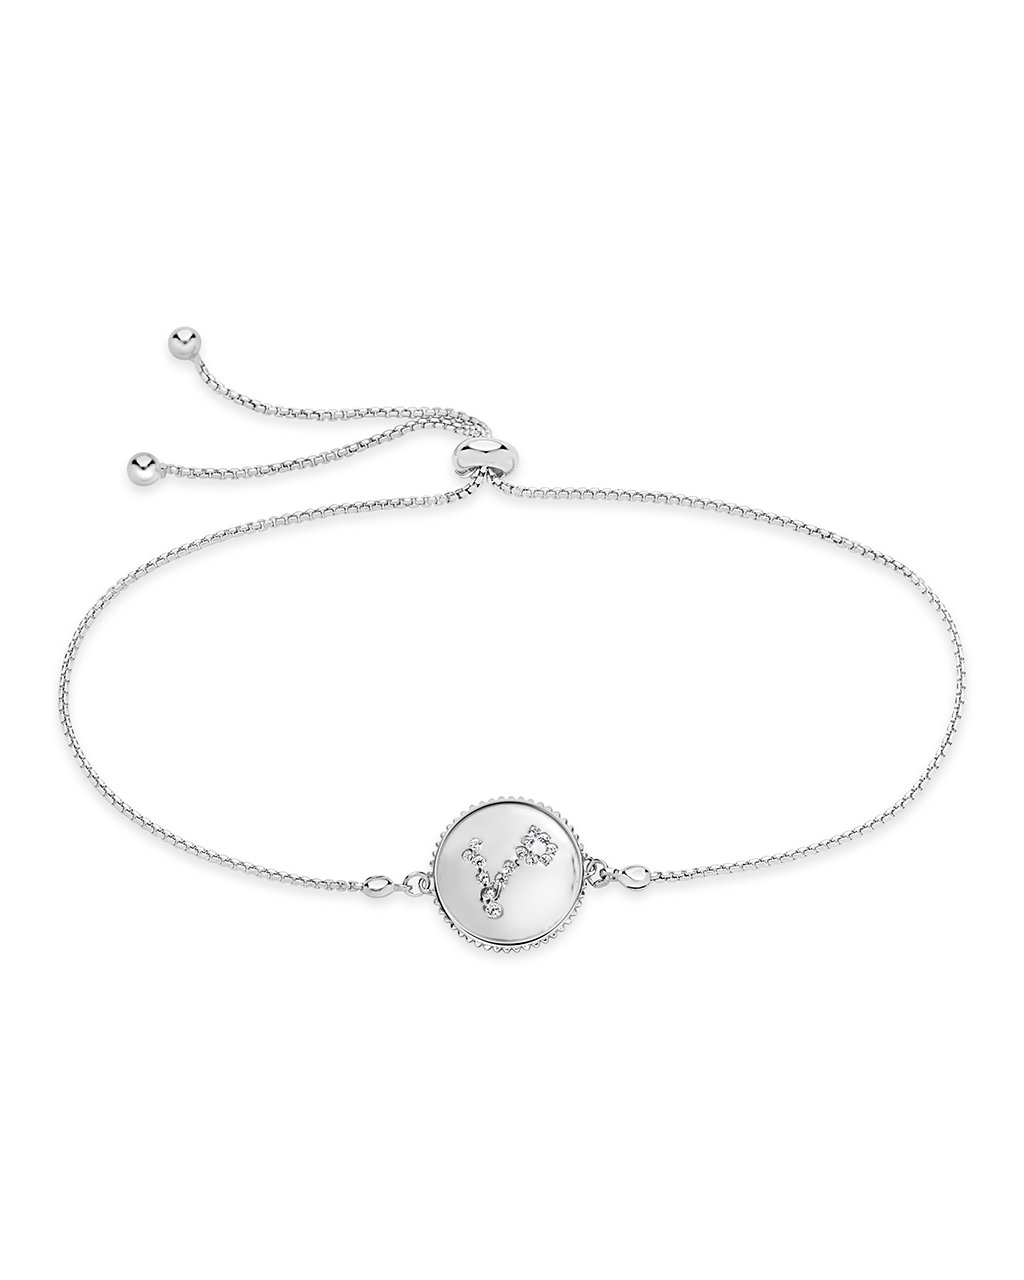 Sterling Silver Constellation Disk Bolo Bracelet Bracelet Sterling Forever Silver Pisces (Feb 19 - Mar 20) 